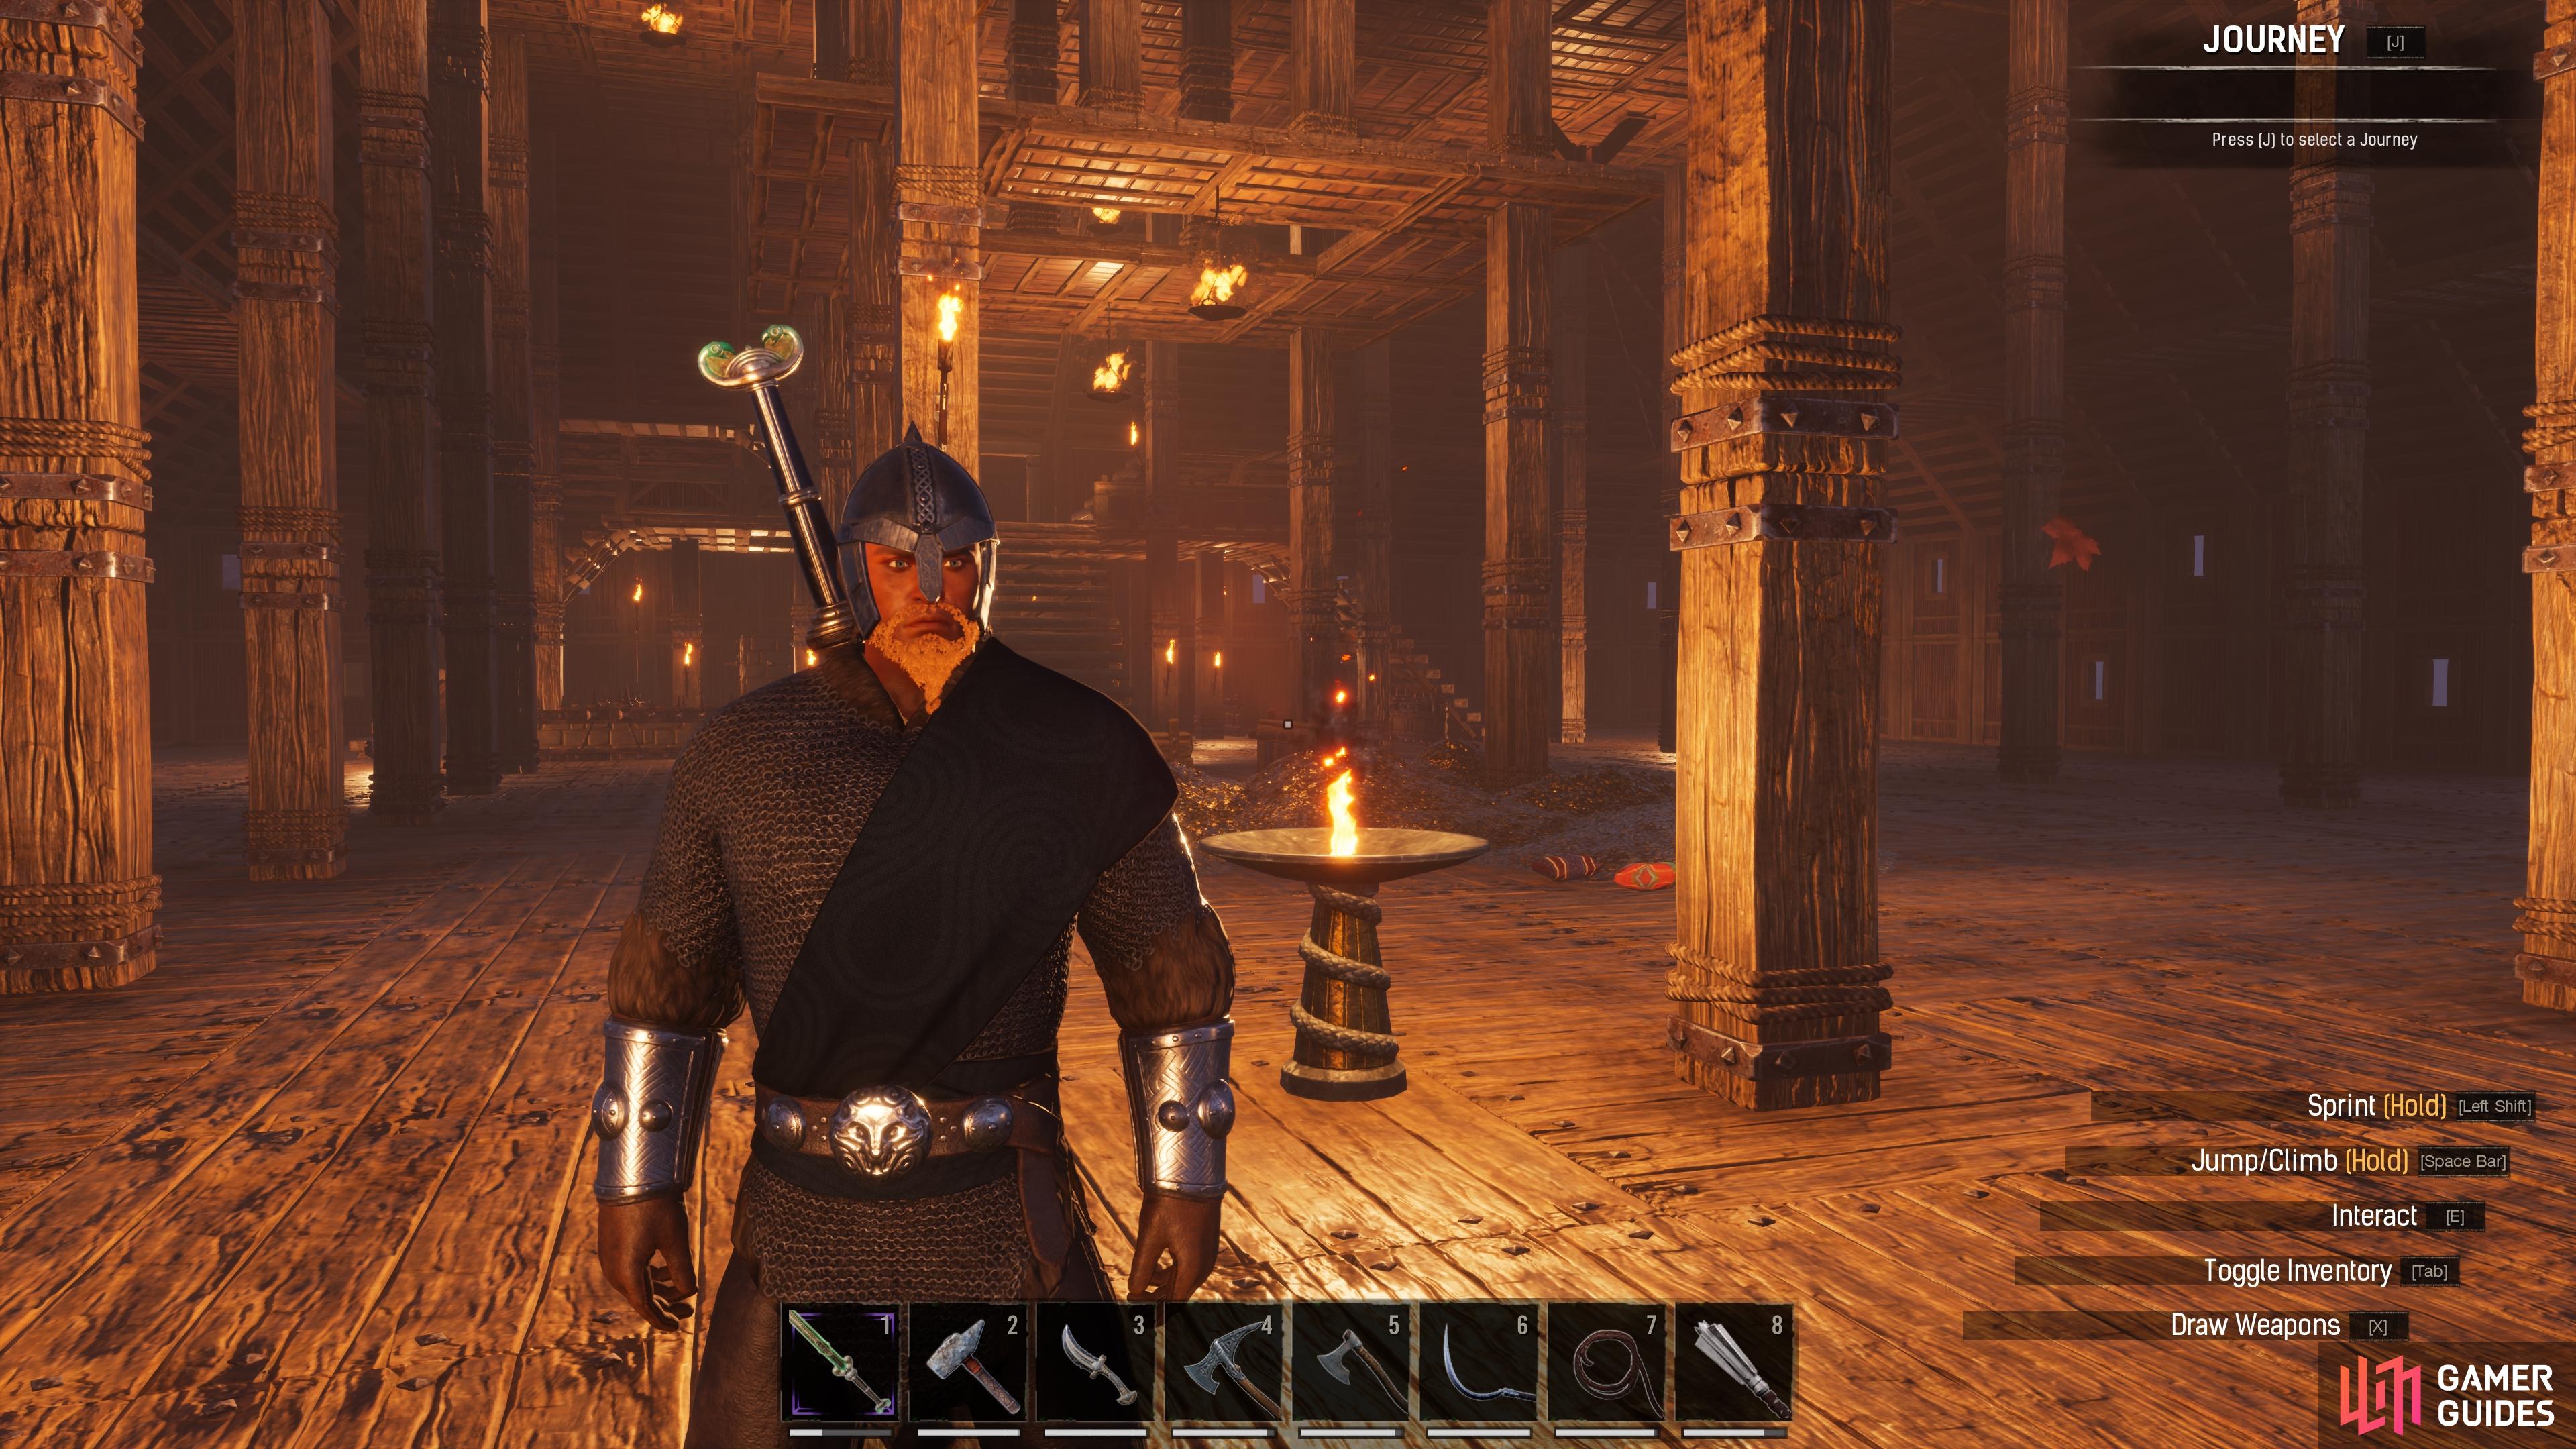 Our bog-standard Viking build in Conan Exiles.